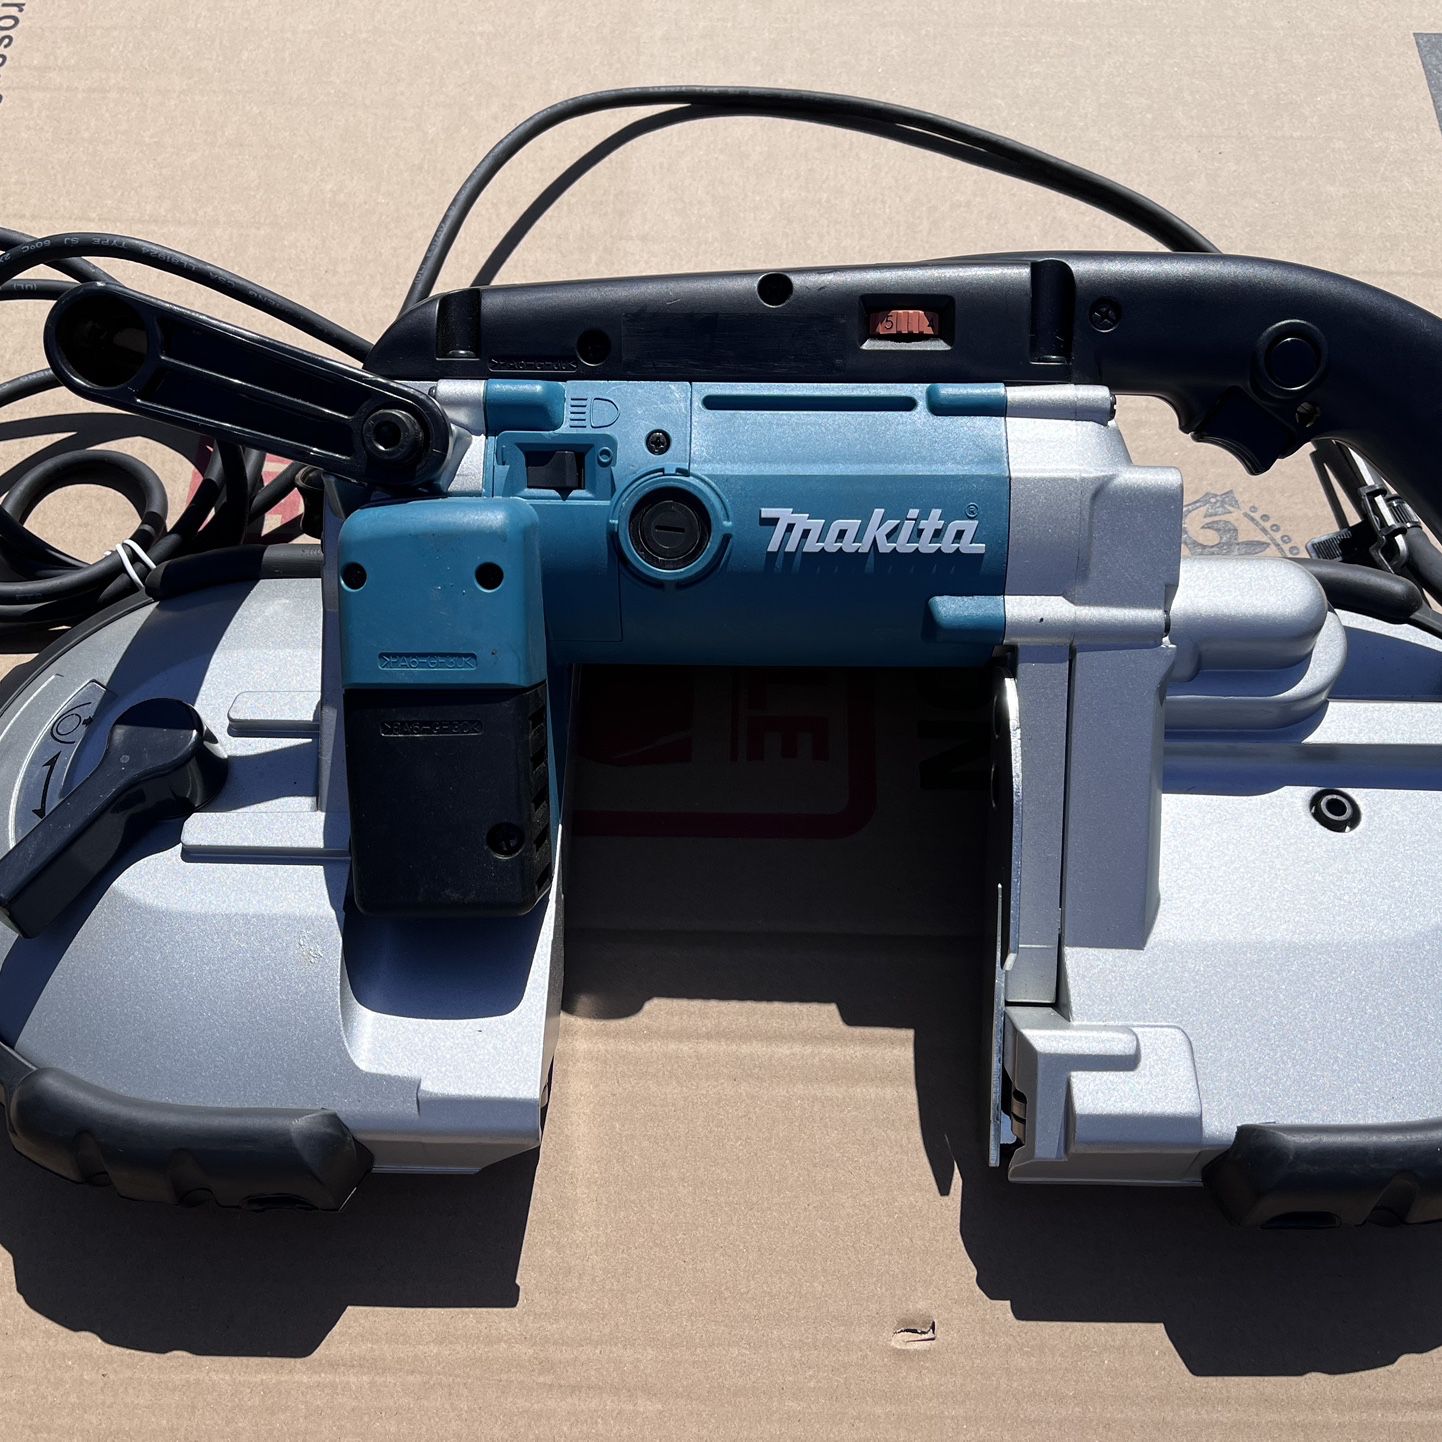 Makita 2107FZ 6.5 Amp Variable Speed Portable Band Saw with Light  without Lock-On for Sale in San Diego, CA OfferUp